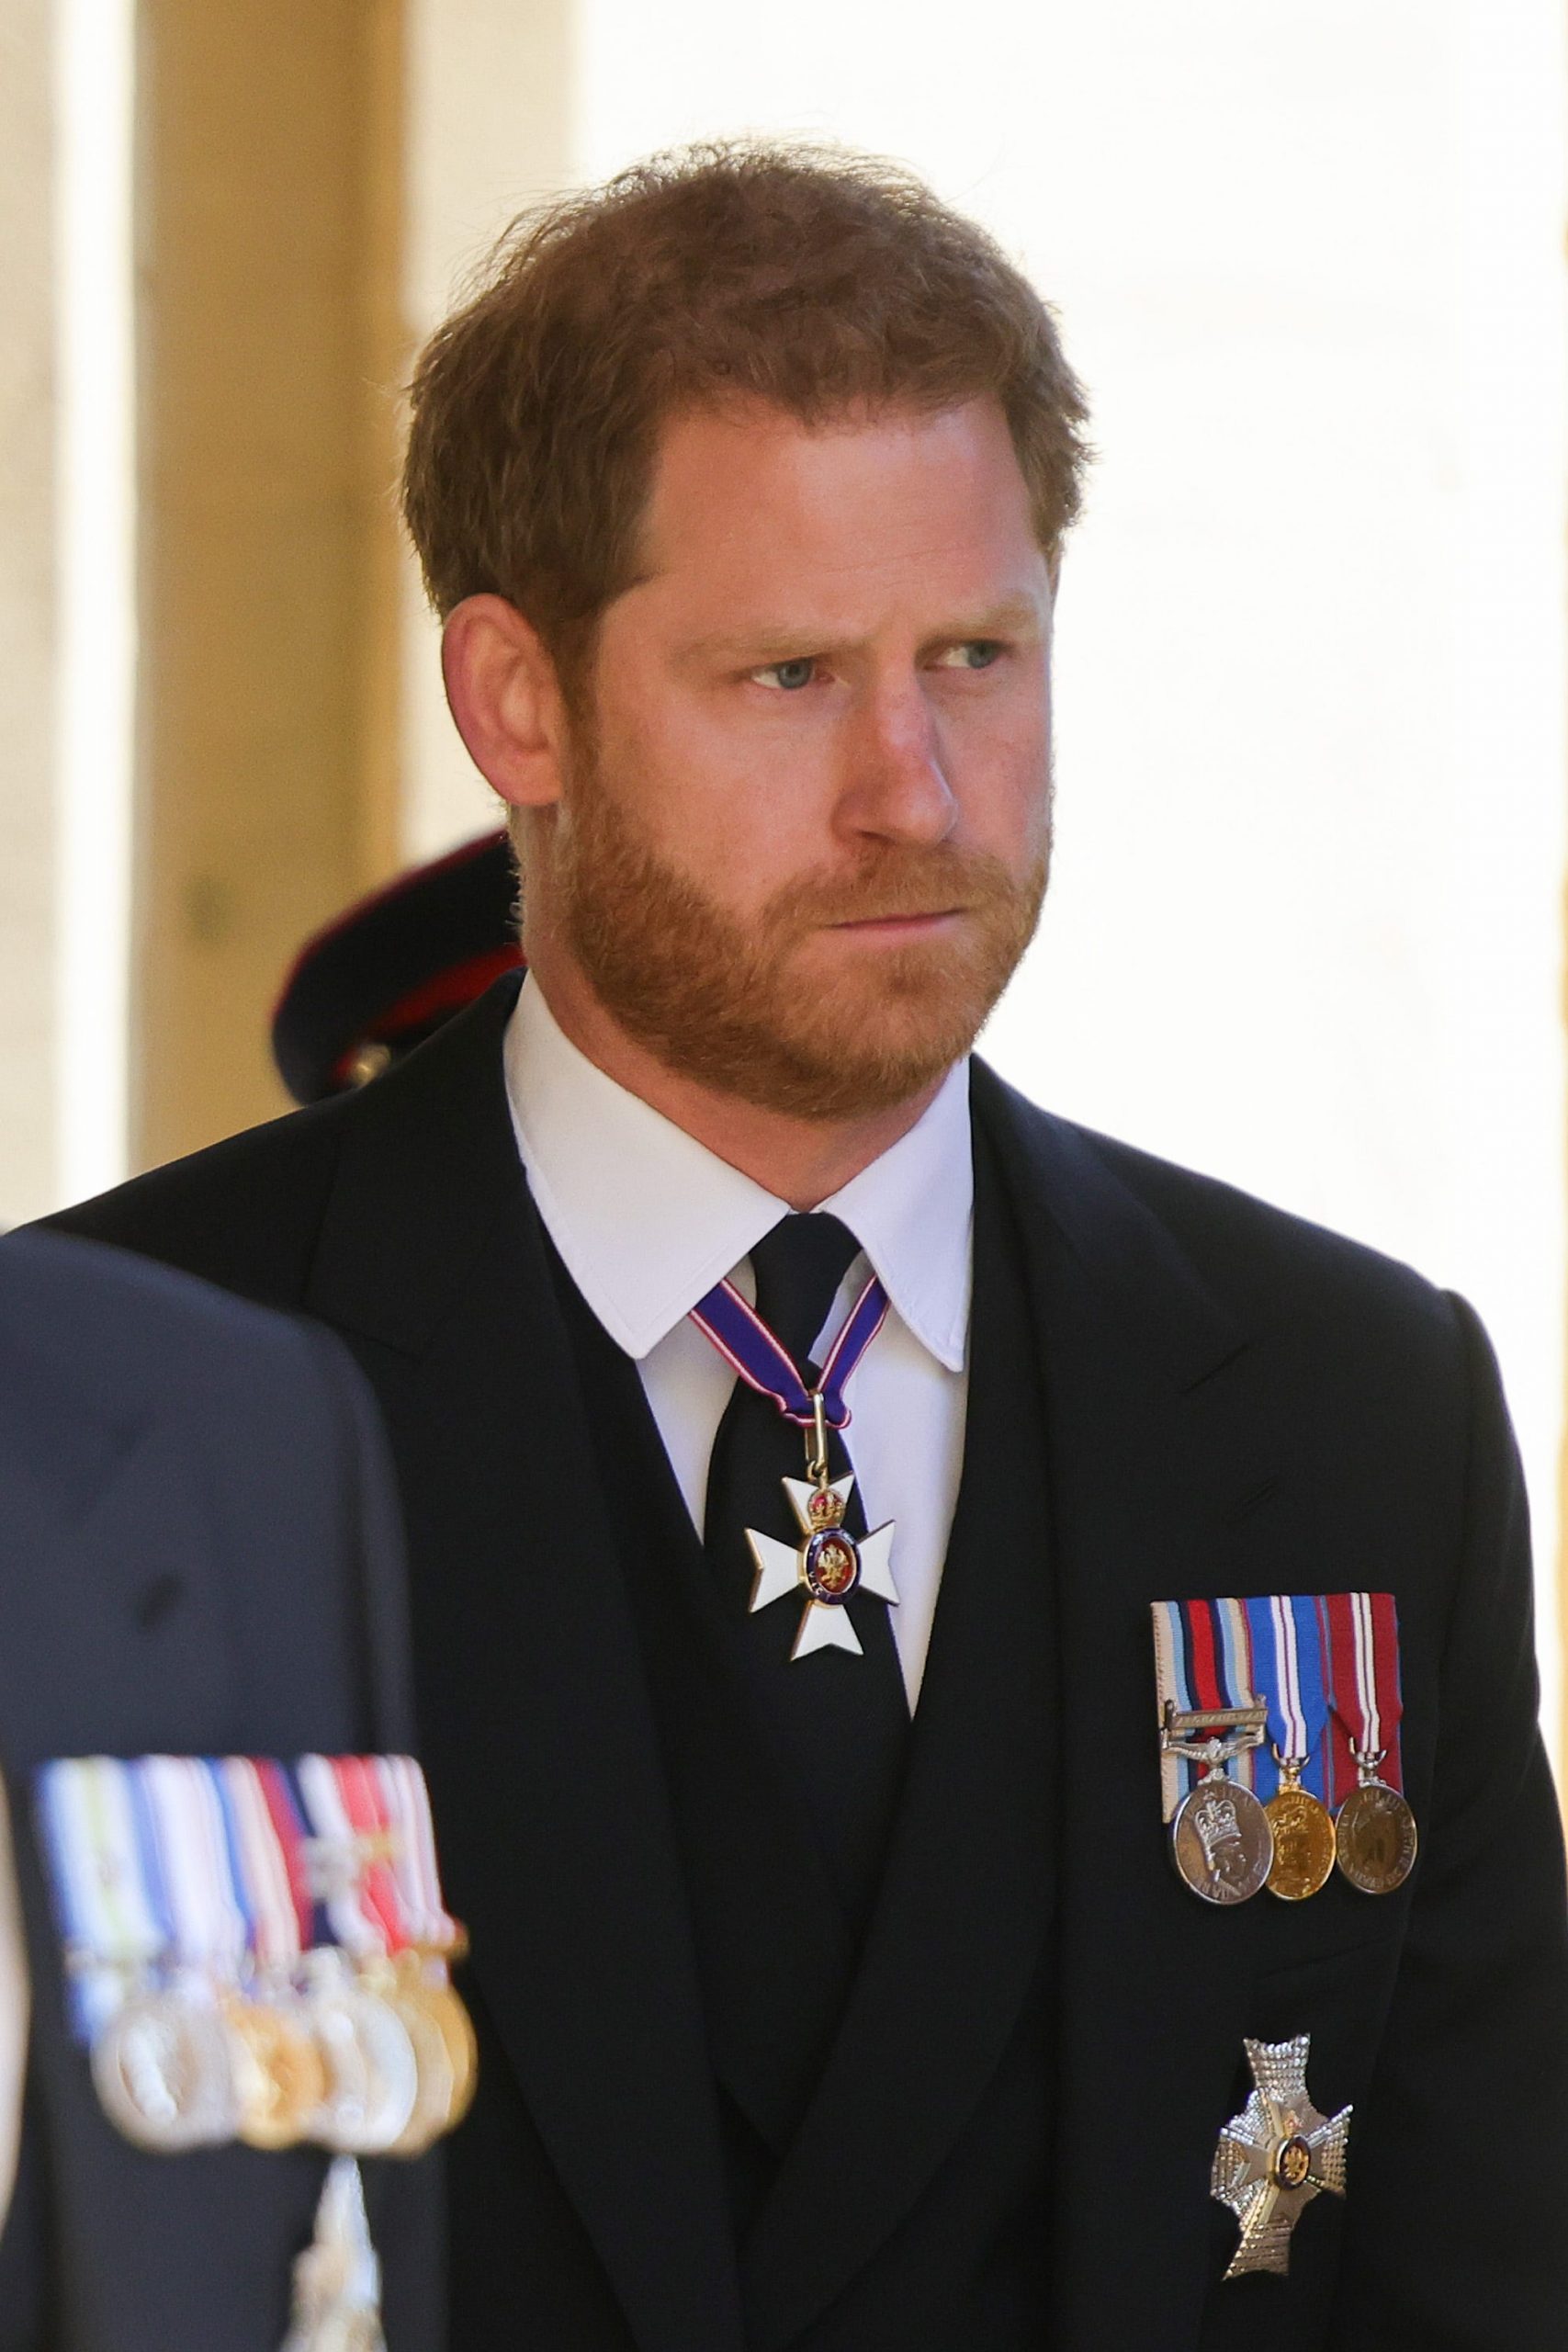 Prince Harry, Duke of Sussex during the funeral of Prince Philip, Duke of Edinburgh at Windsor Castle on April 17, 2021 in Windsor, England.